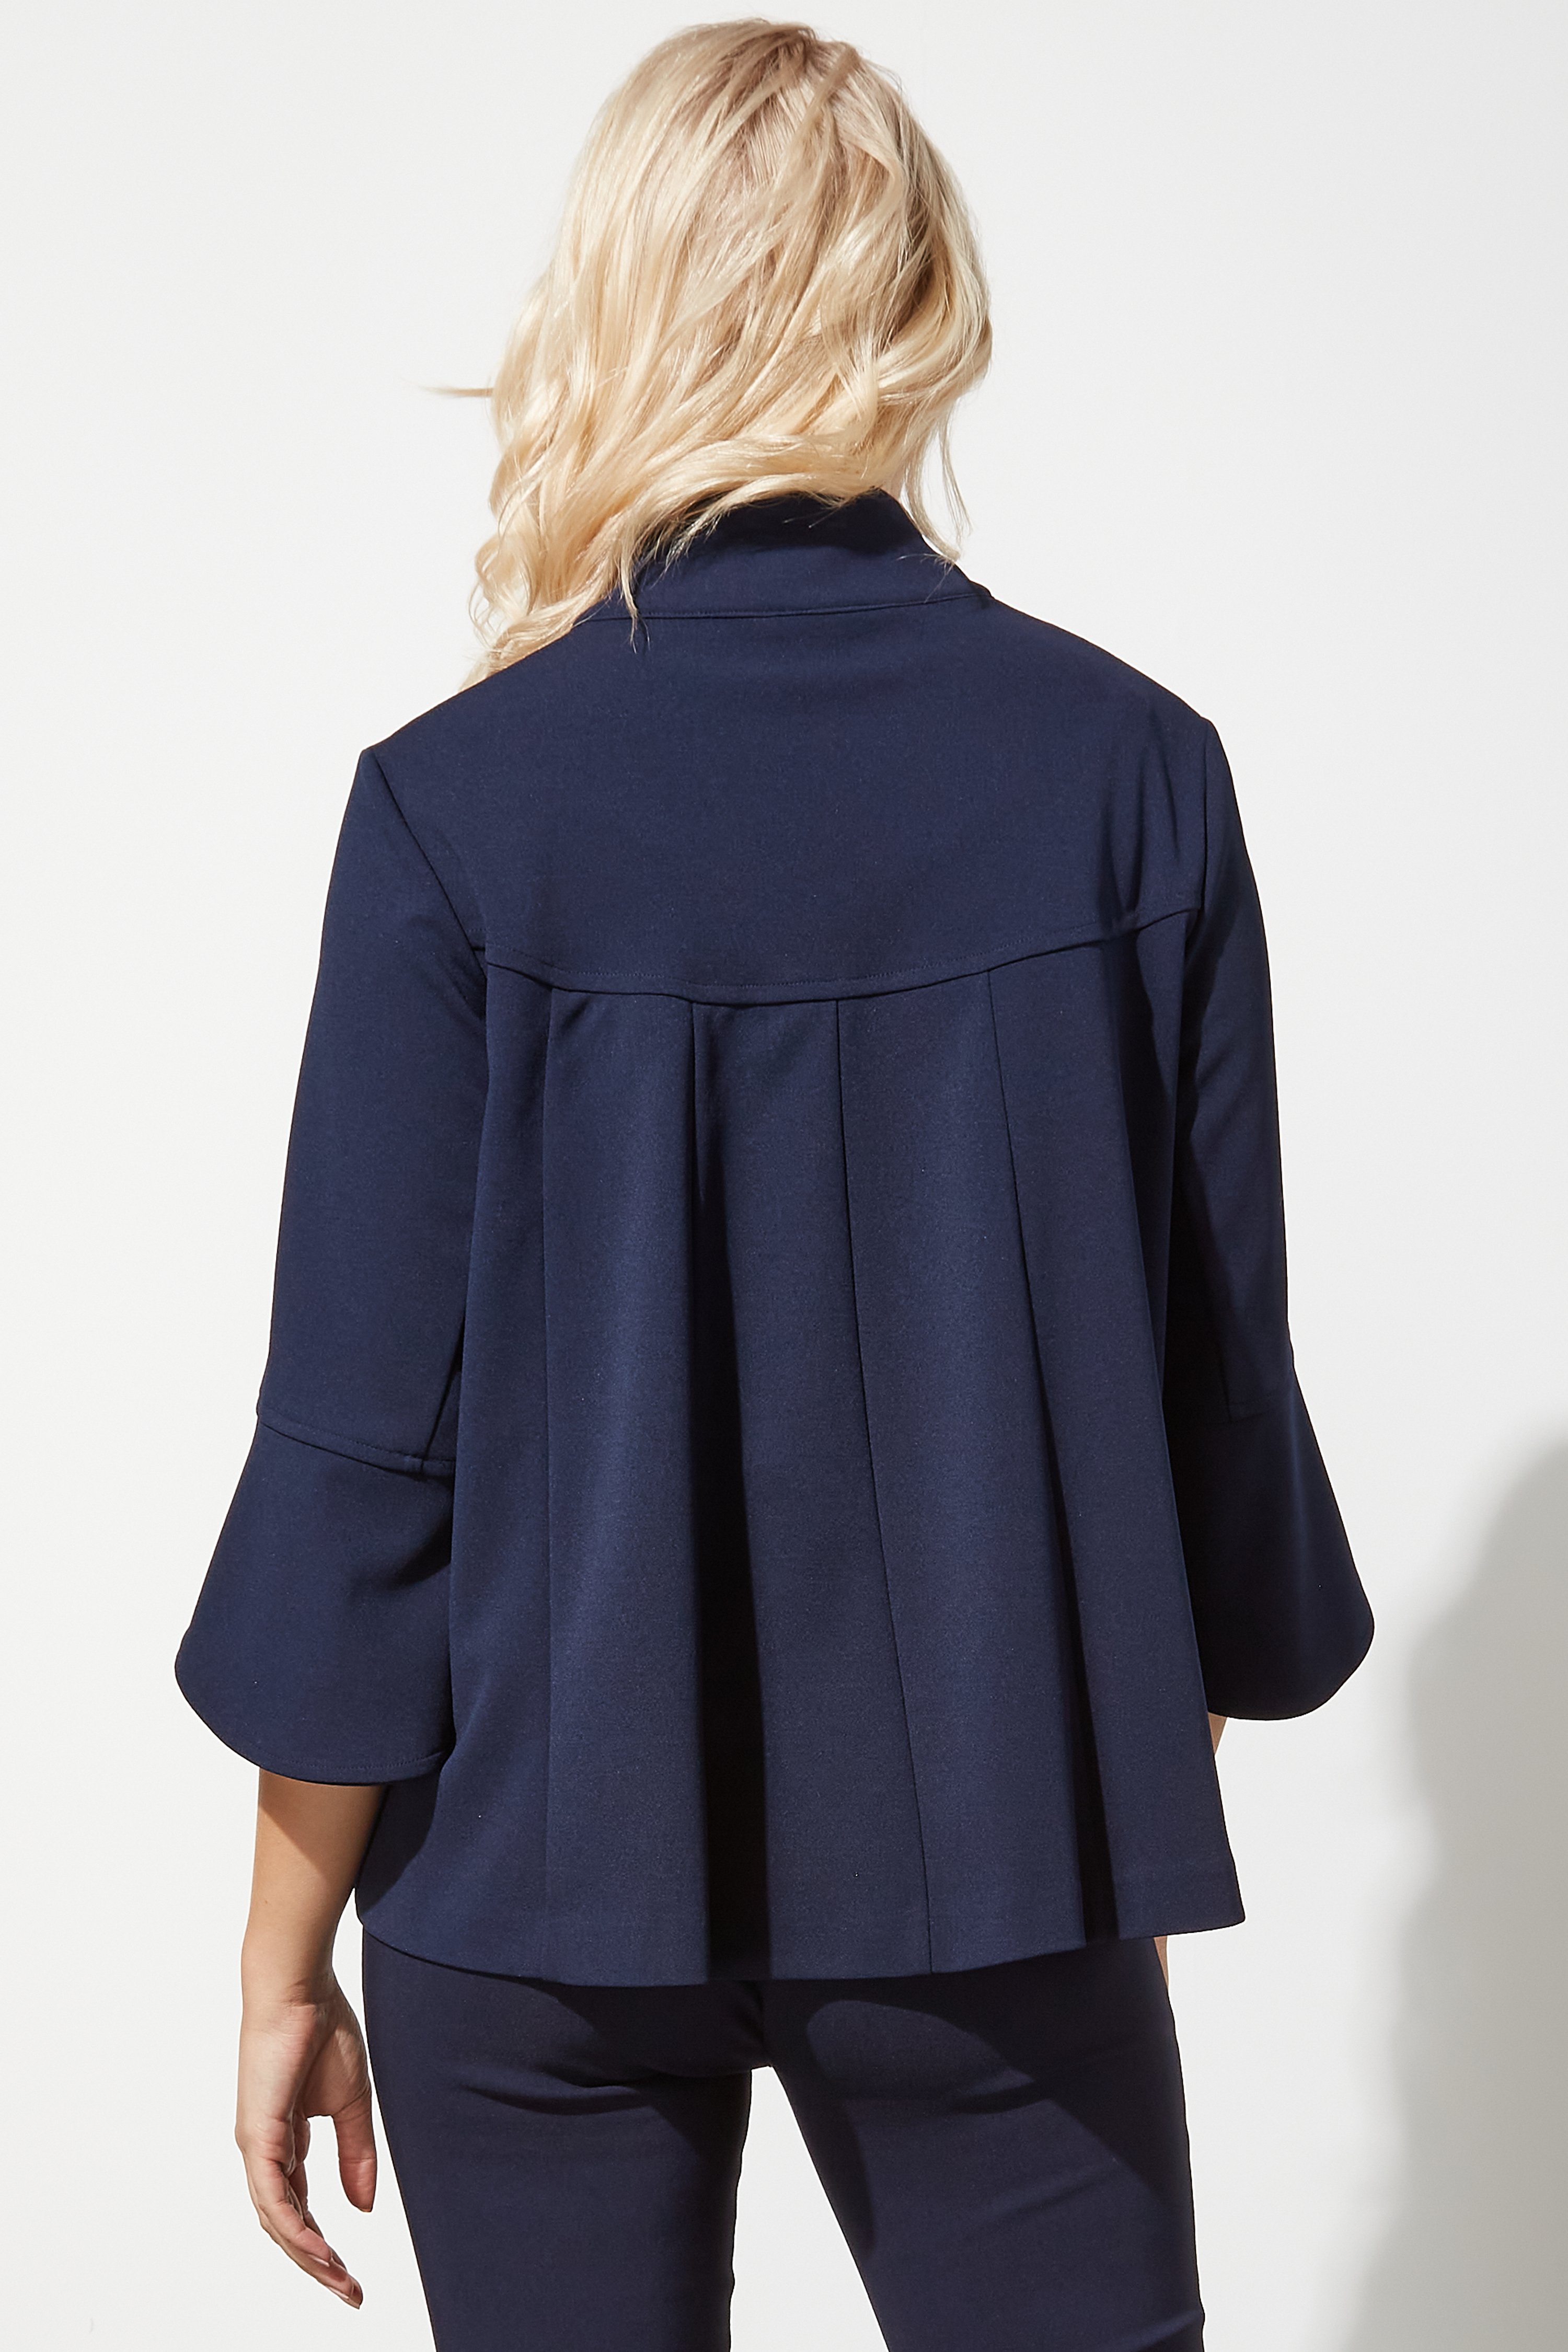 Navy  High Neck Button Detail Swing Jacket, Image 2 of 3